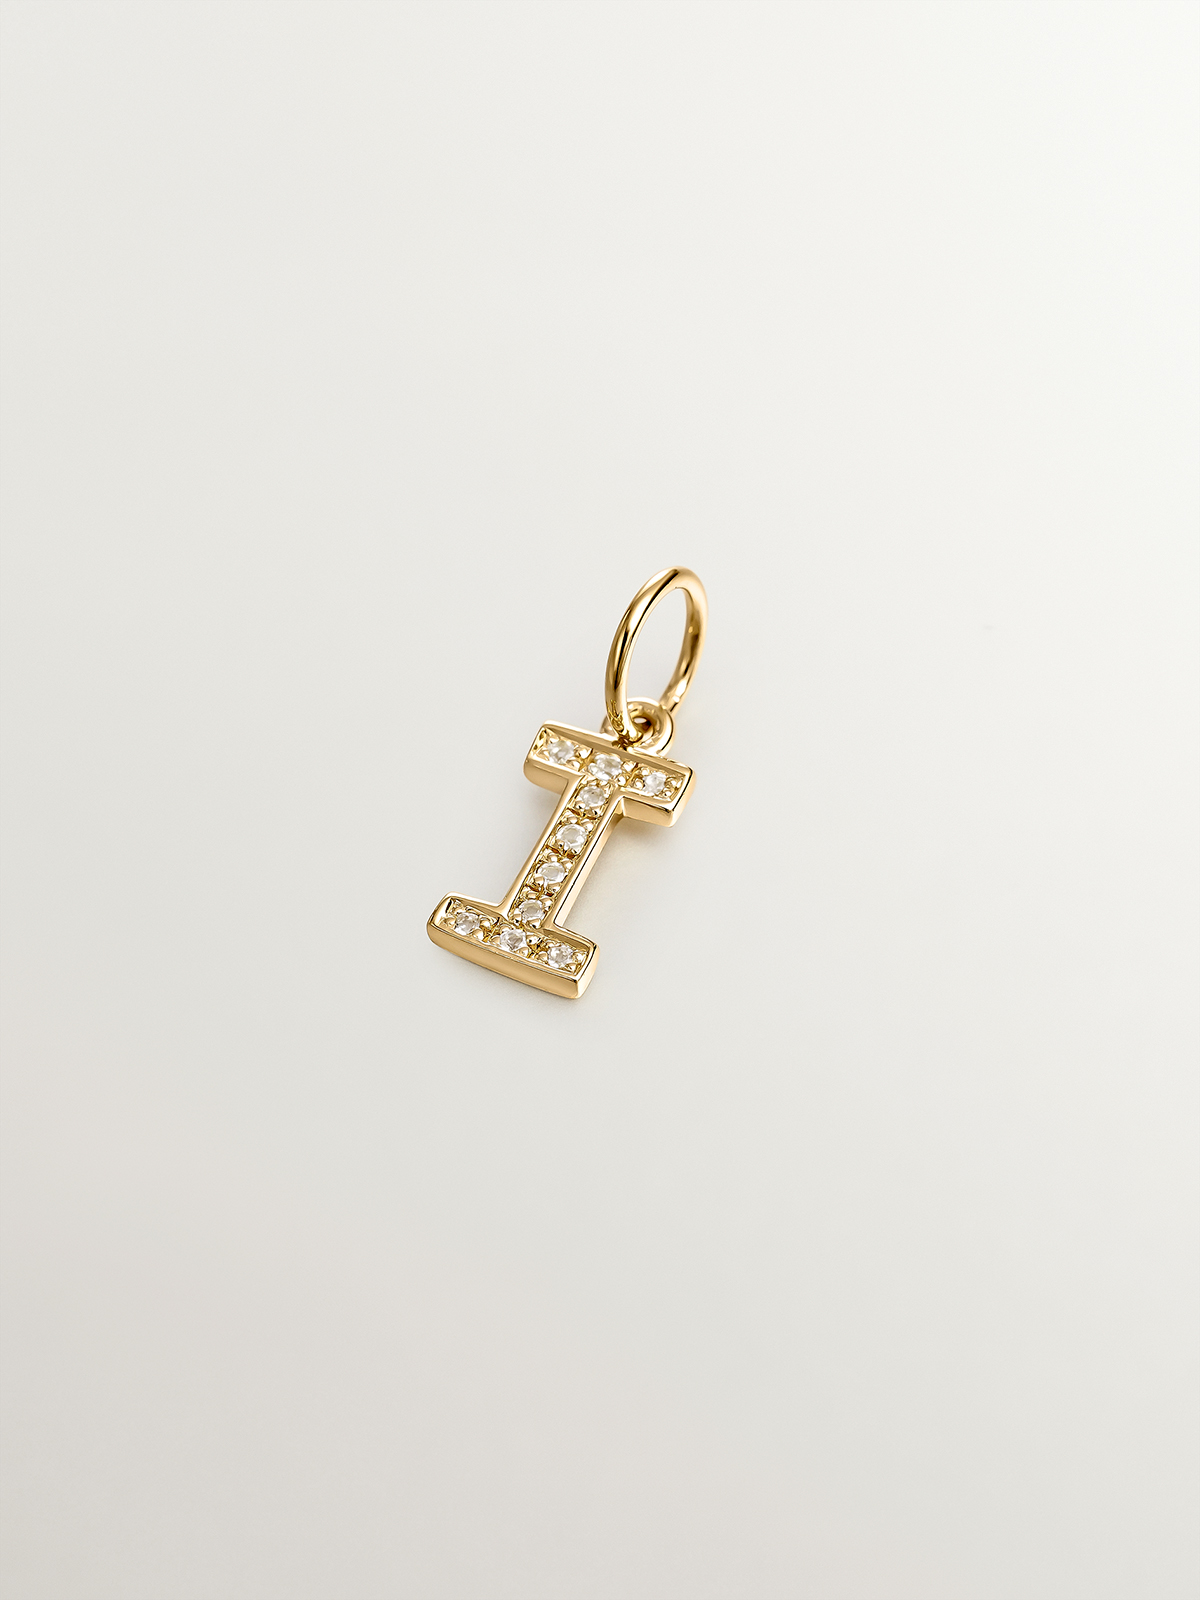 I Initial charm made of 925 silver, bathed in 18K yellow gold, and white topaz.